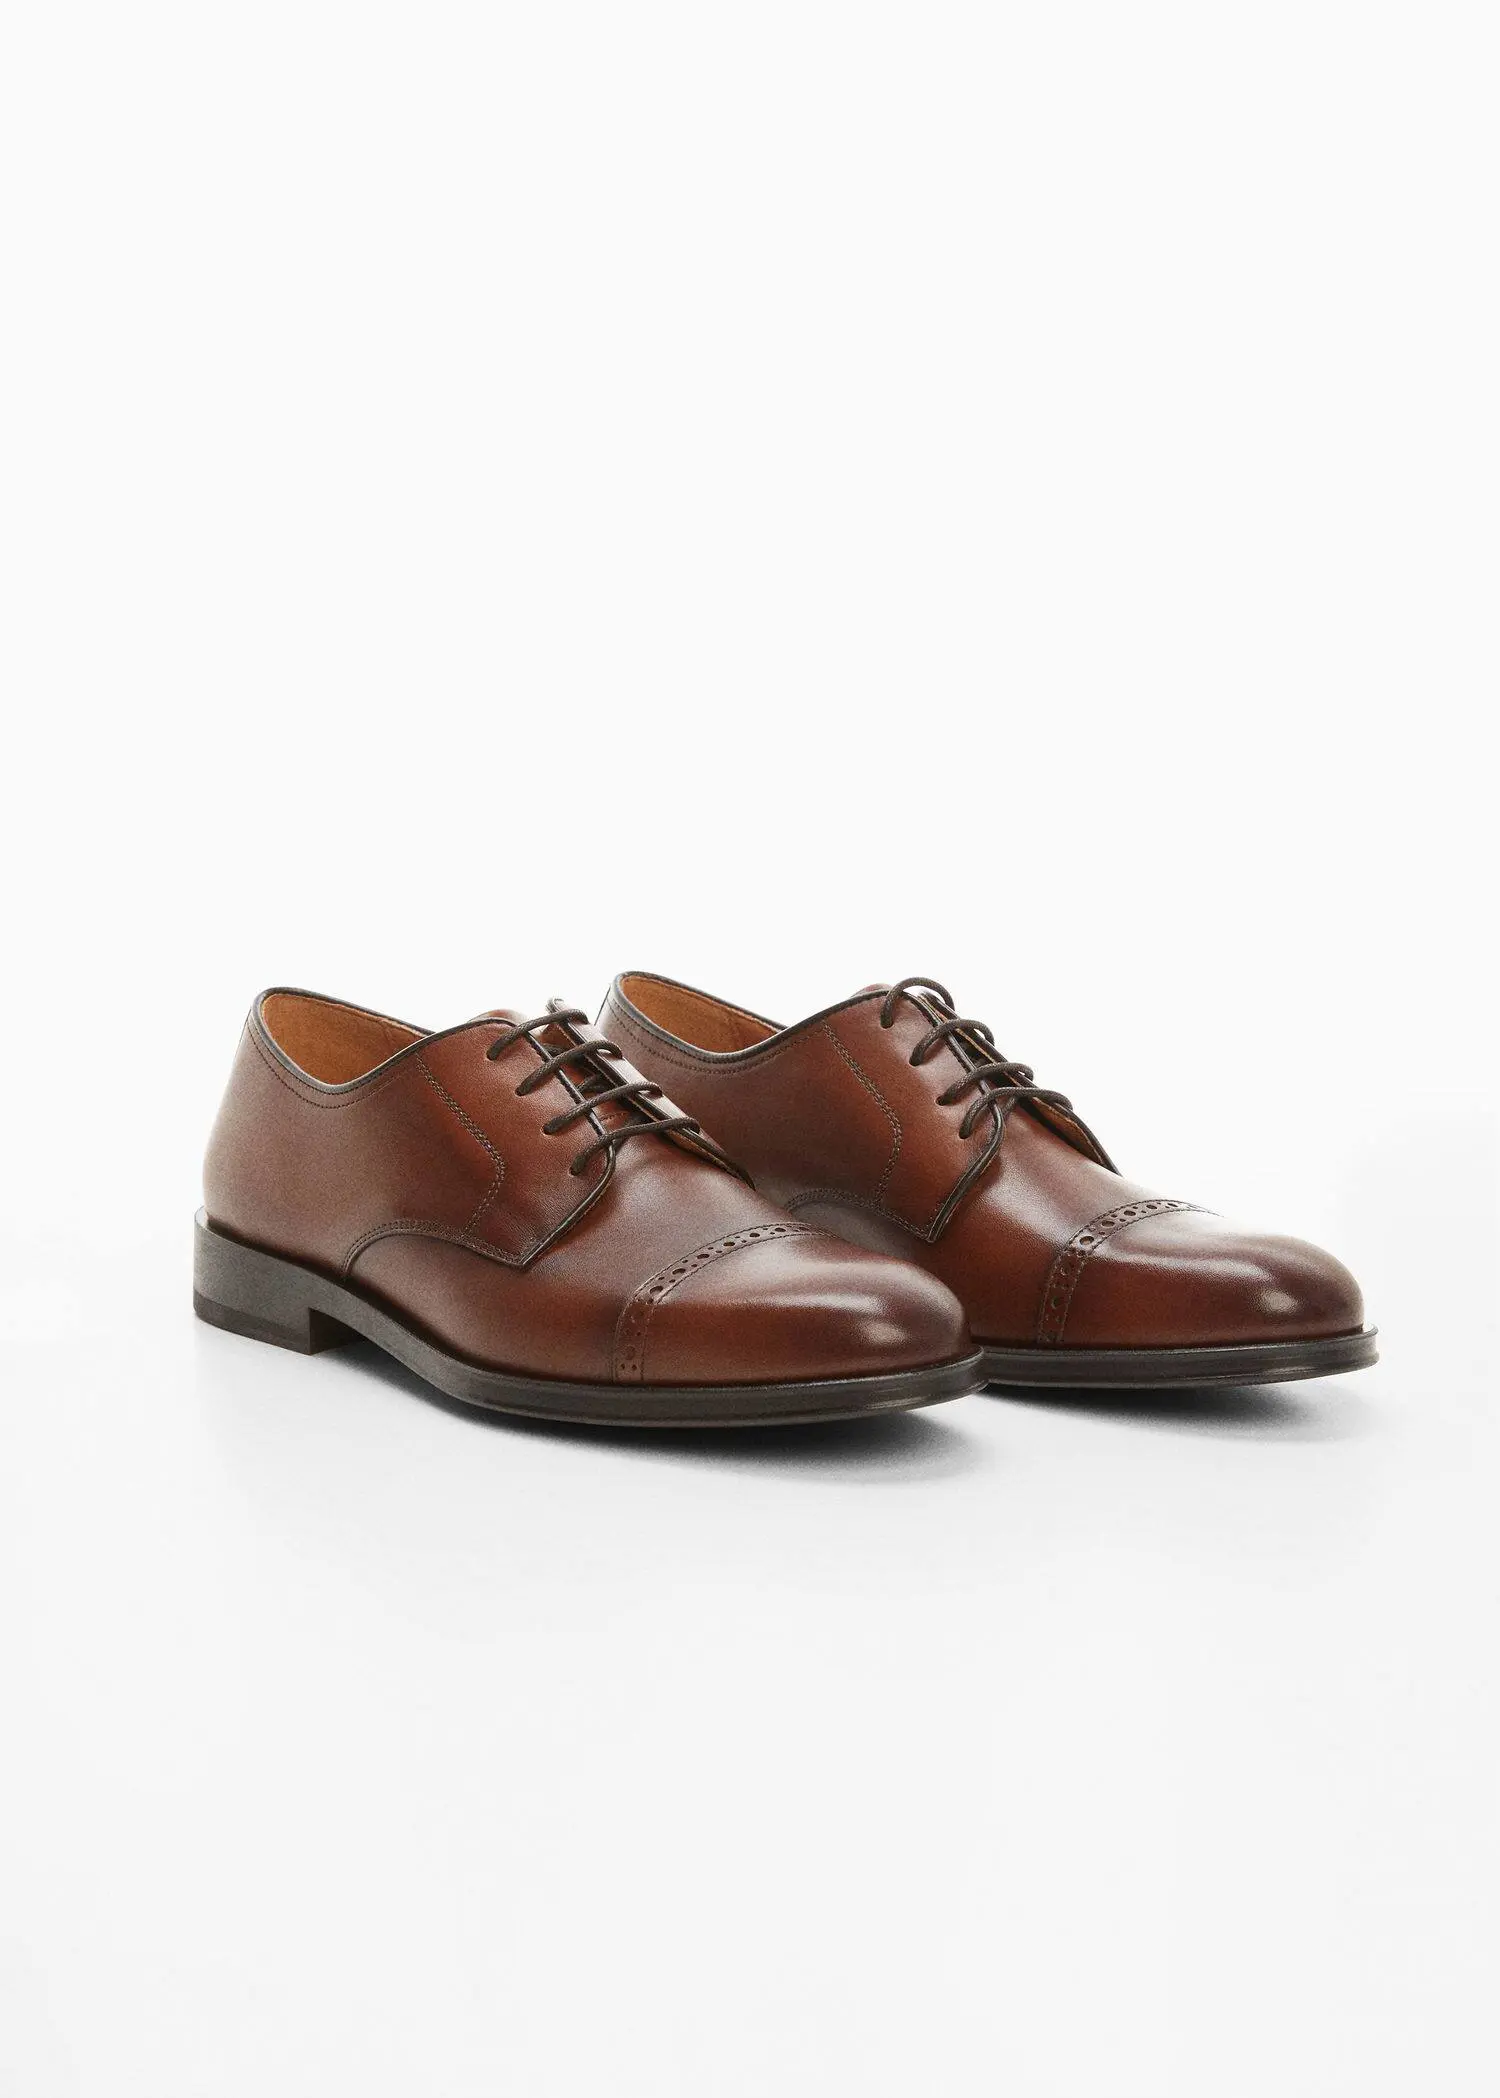 Mango Leather suit shoes. a pair of brown dress shoes on a white background 